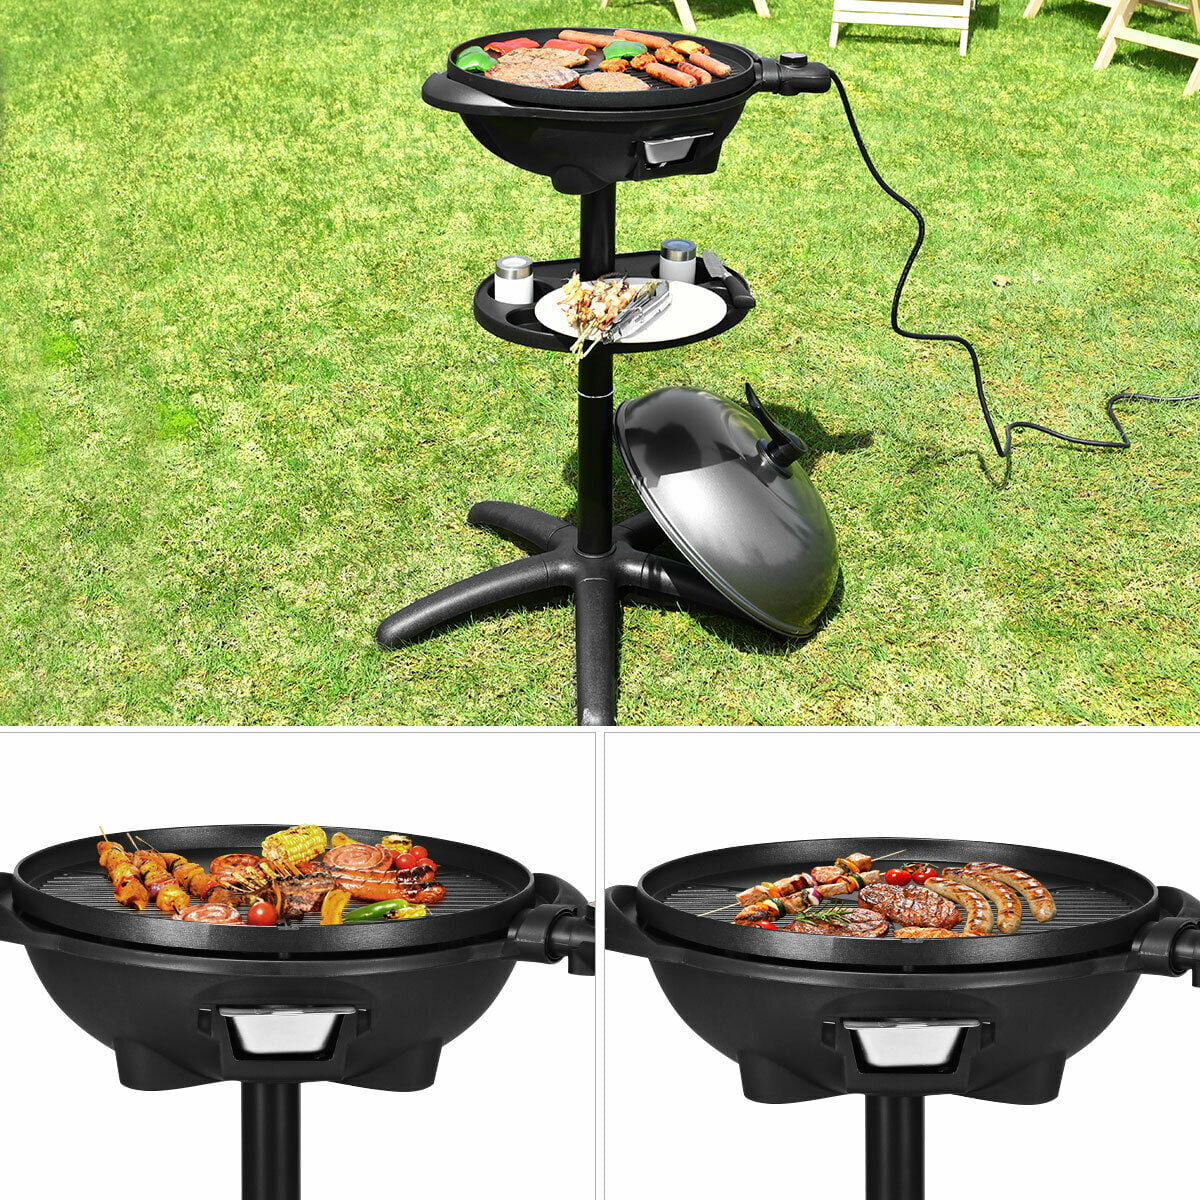 Details about   Indoor/Outdoor Portable Electric Barbecue Grill Cooking BBQ Automatic thermostat 